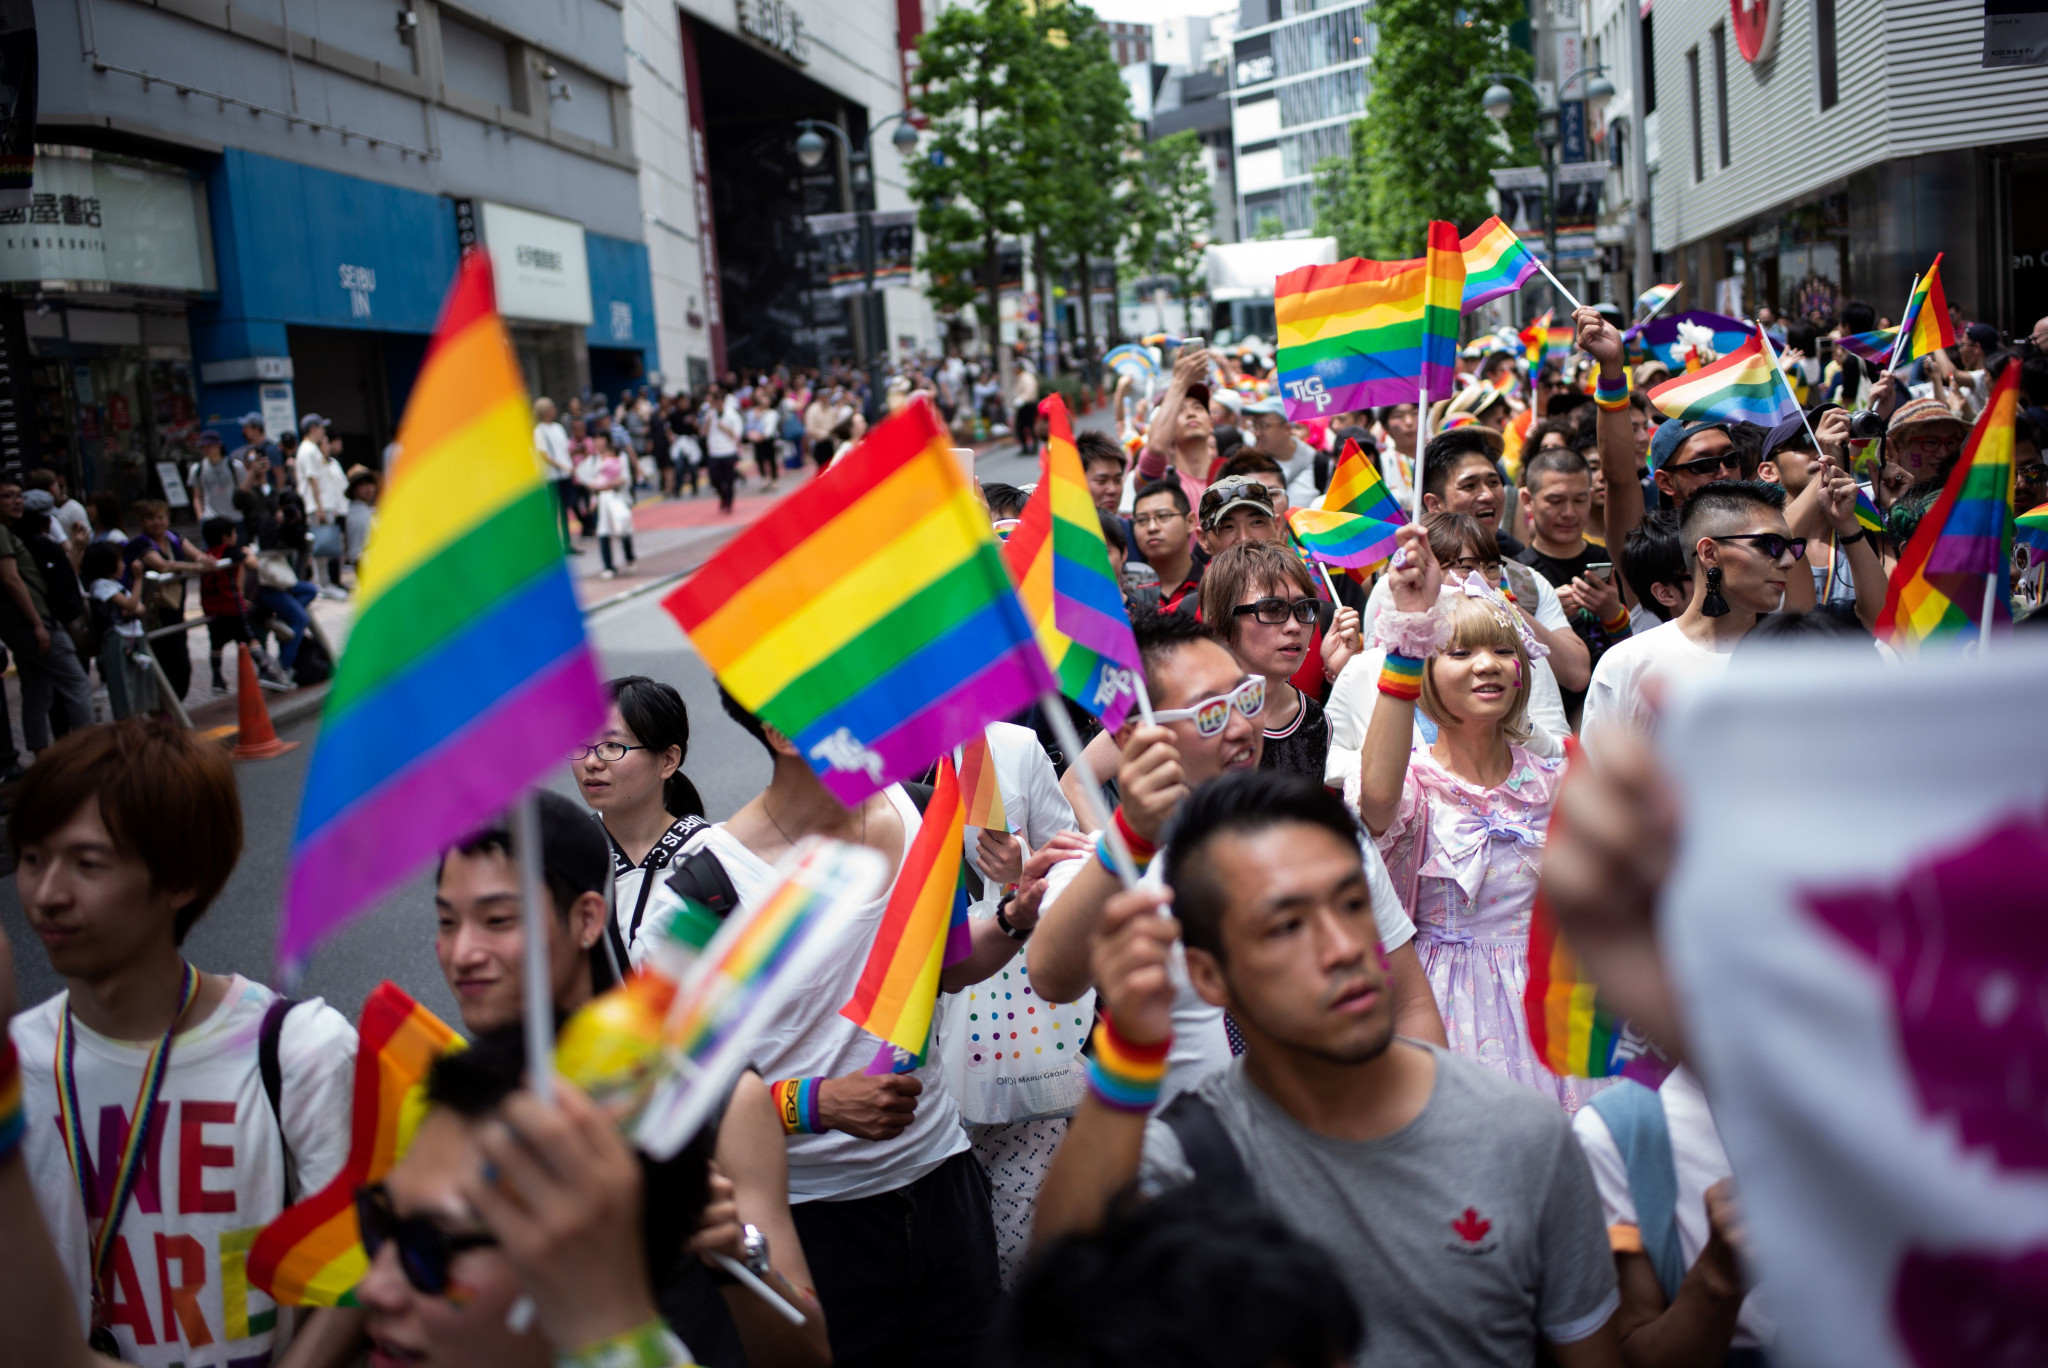 Human rights groups to launch equality campaign in Japan ahead of Tokyo 2020